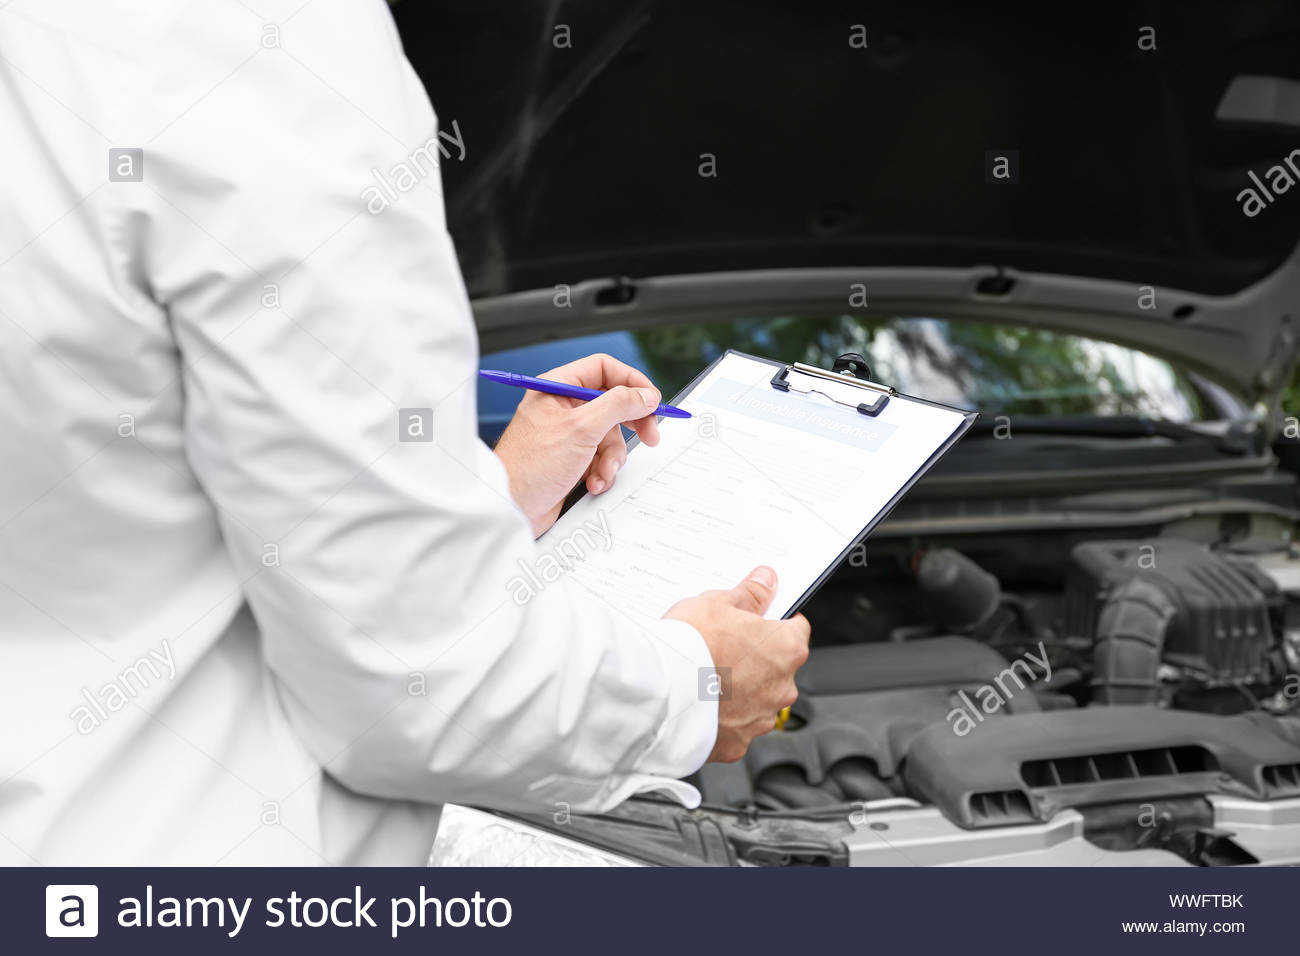 Insurance Agent Near Damaged Car Outdoors Closeup Stock with measurements 1300 X 956